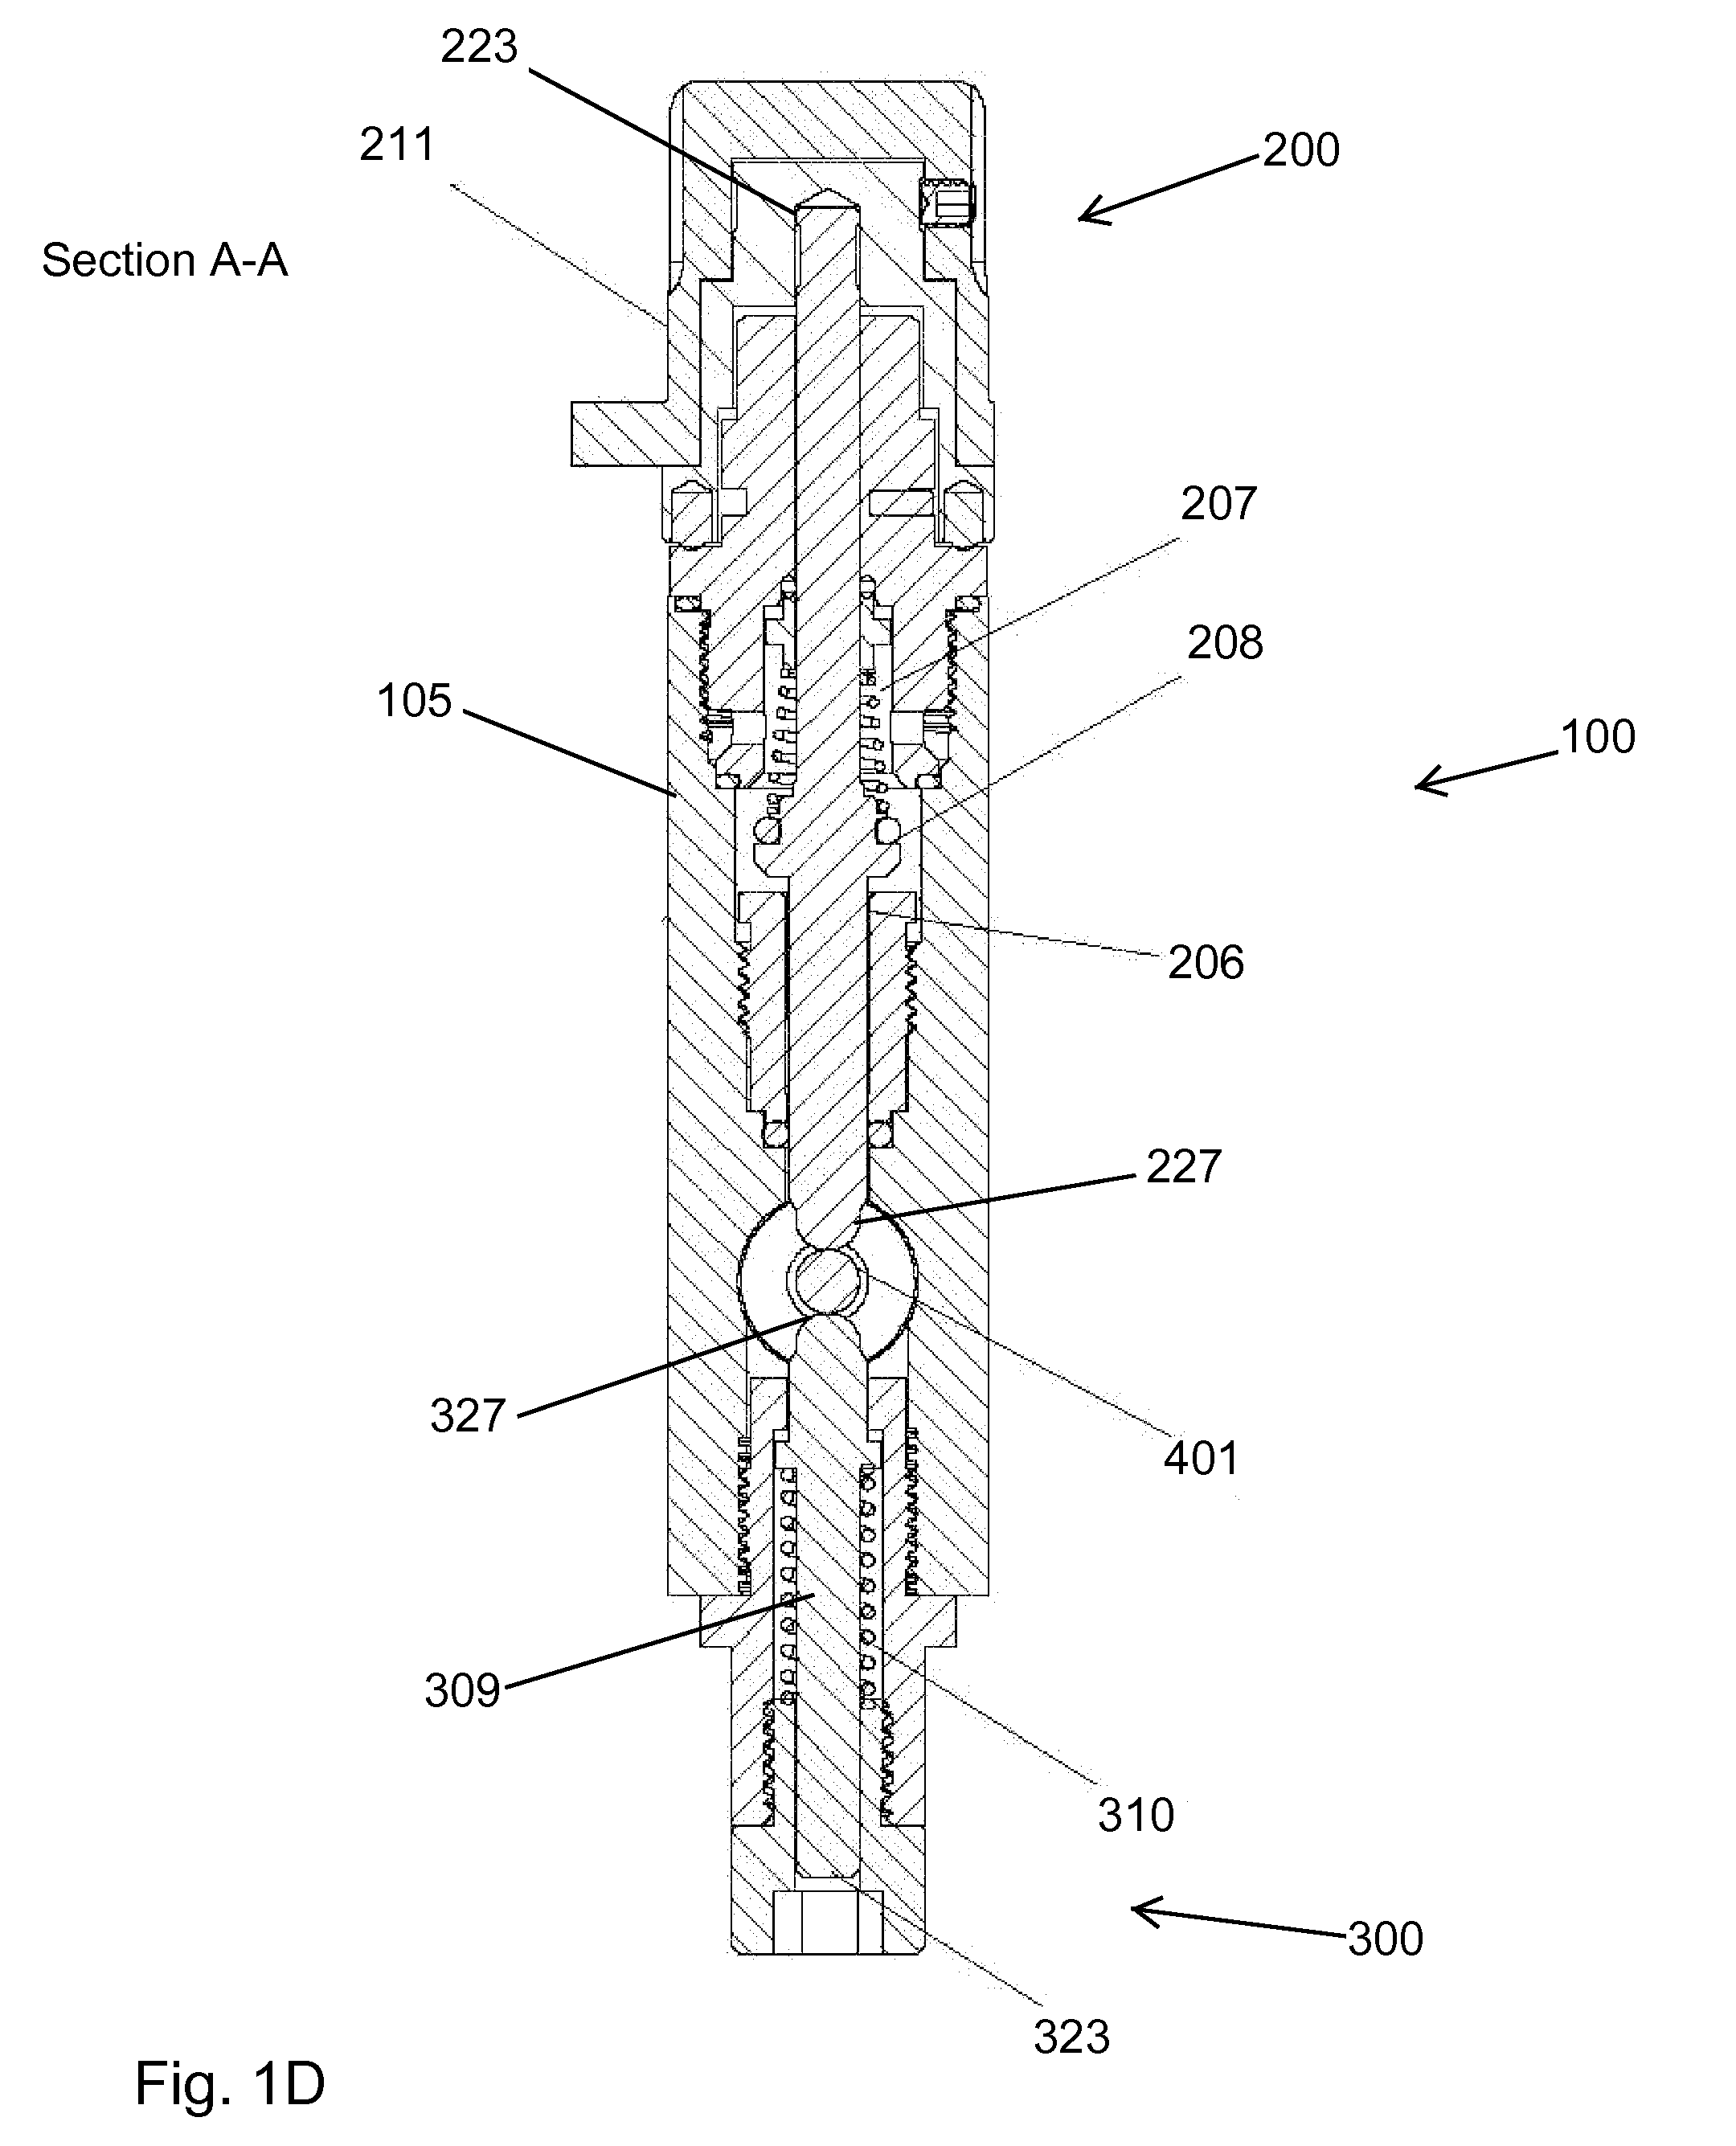 Device and method to prevent improper fluid mixing ratios in two component materials